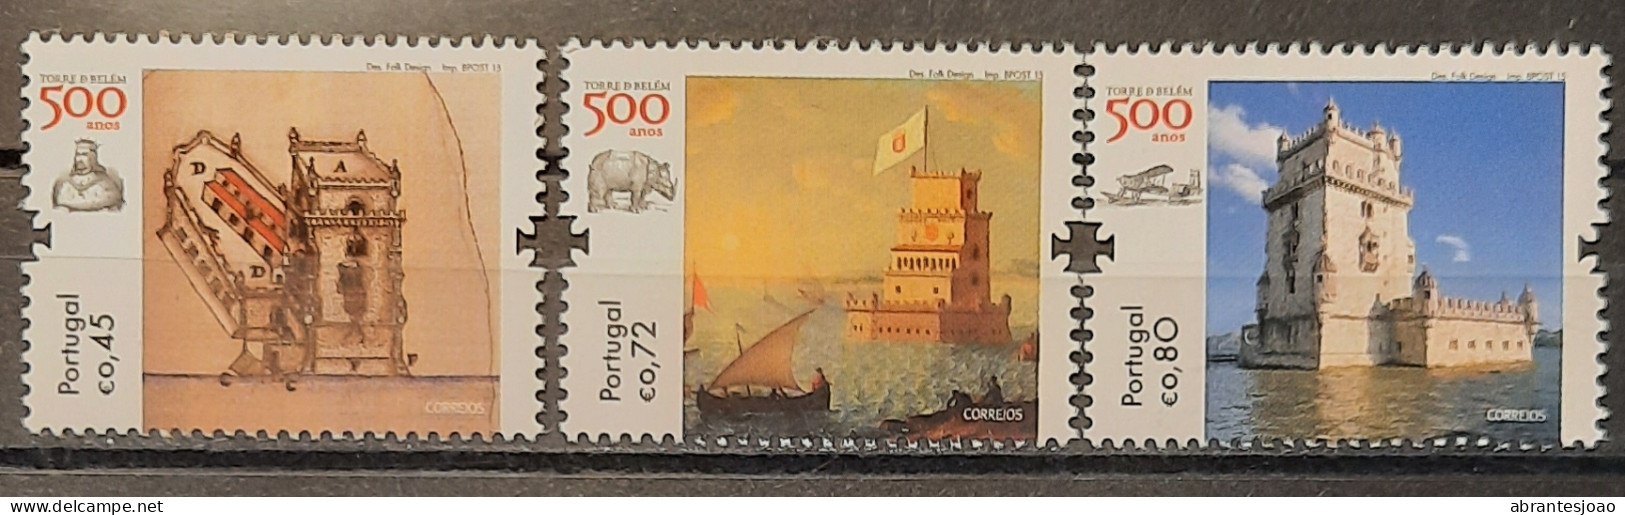 2015 - Portugal - MNH - Tower Of Belem - 500 Years - 3 Stamps - Ungebraucht